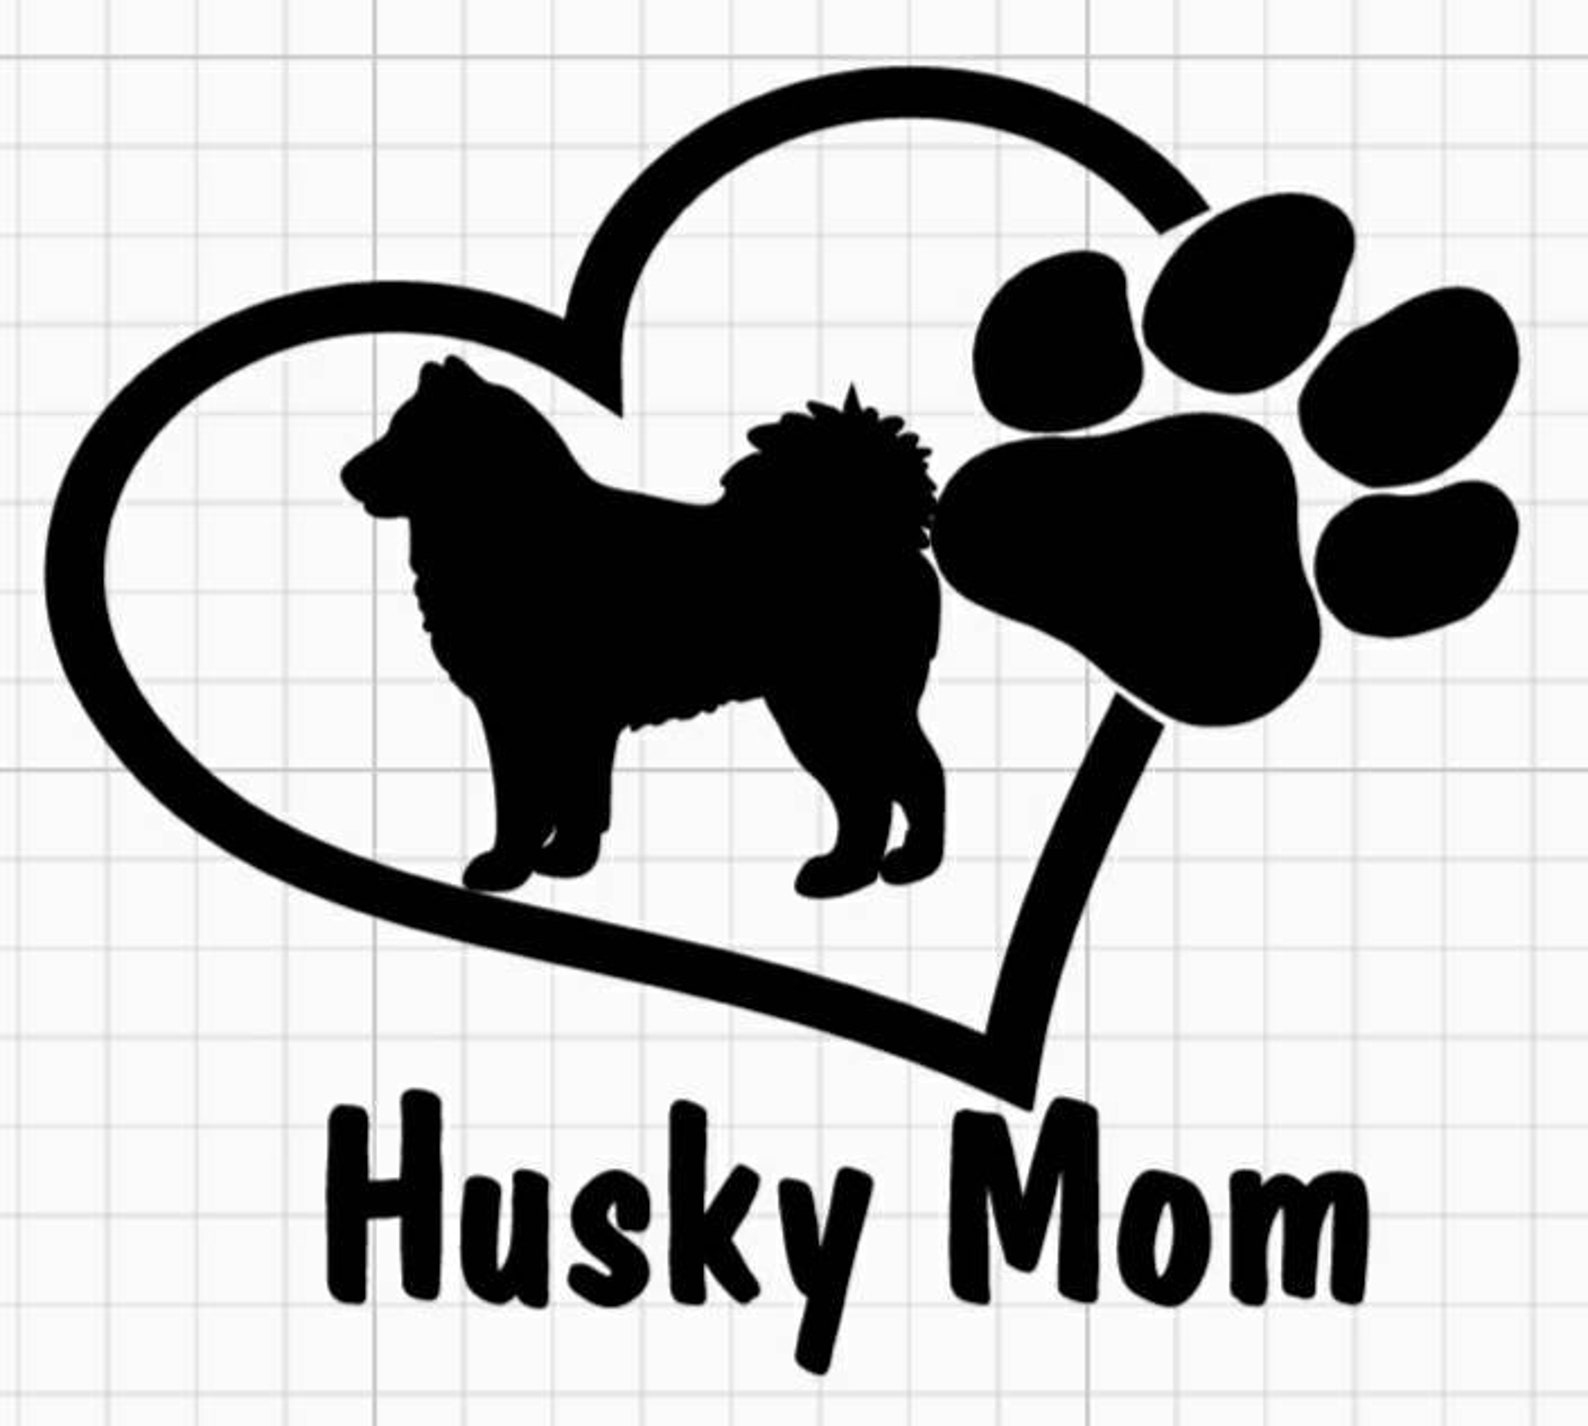 Husky mom husky husky mom decal husky decal dog mom decal | Etsy